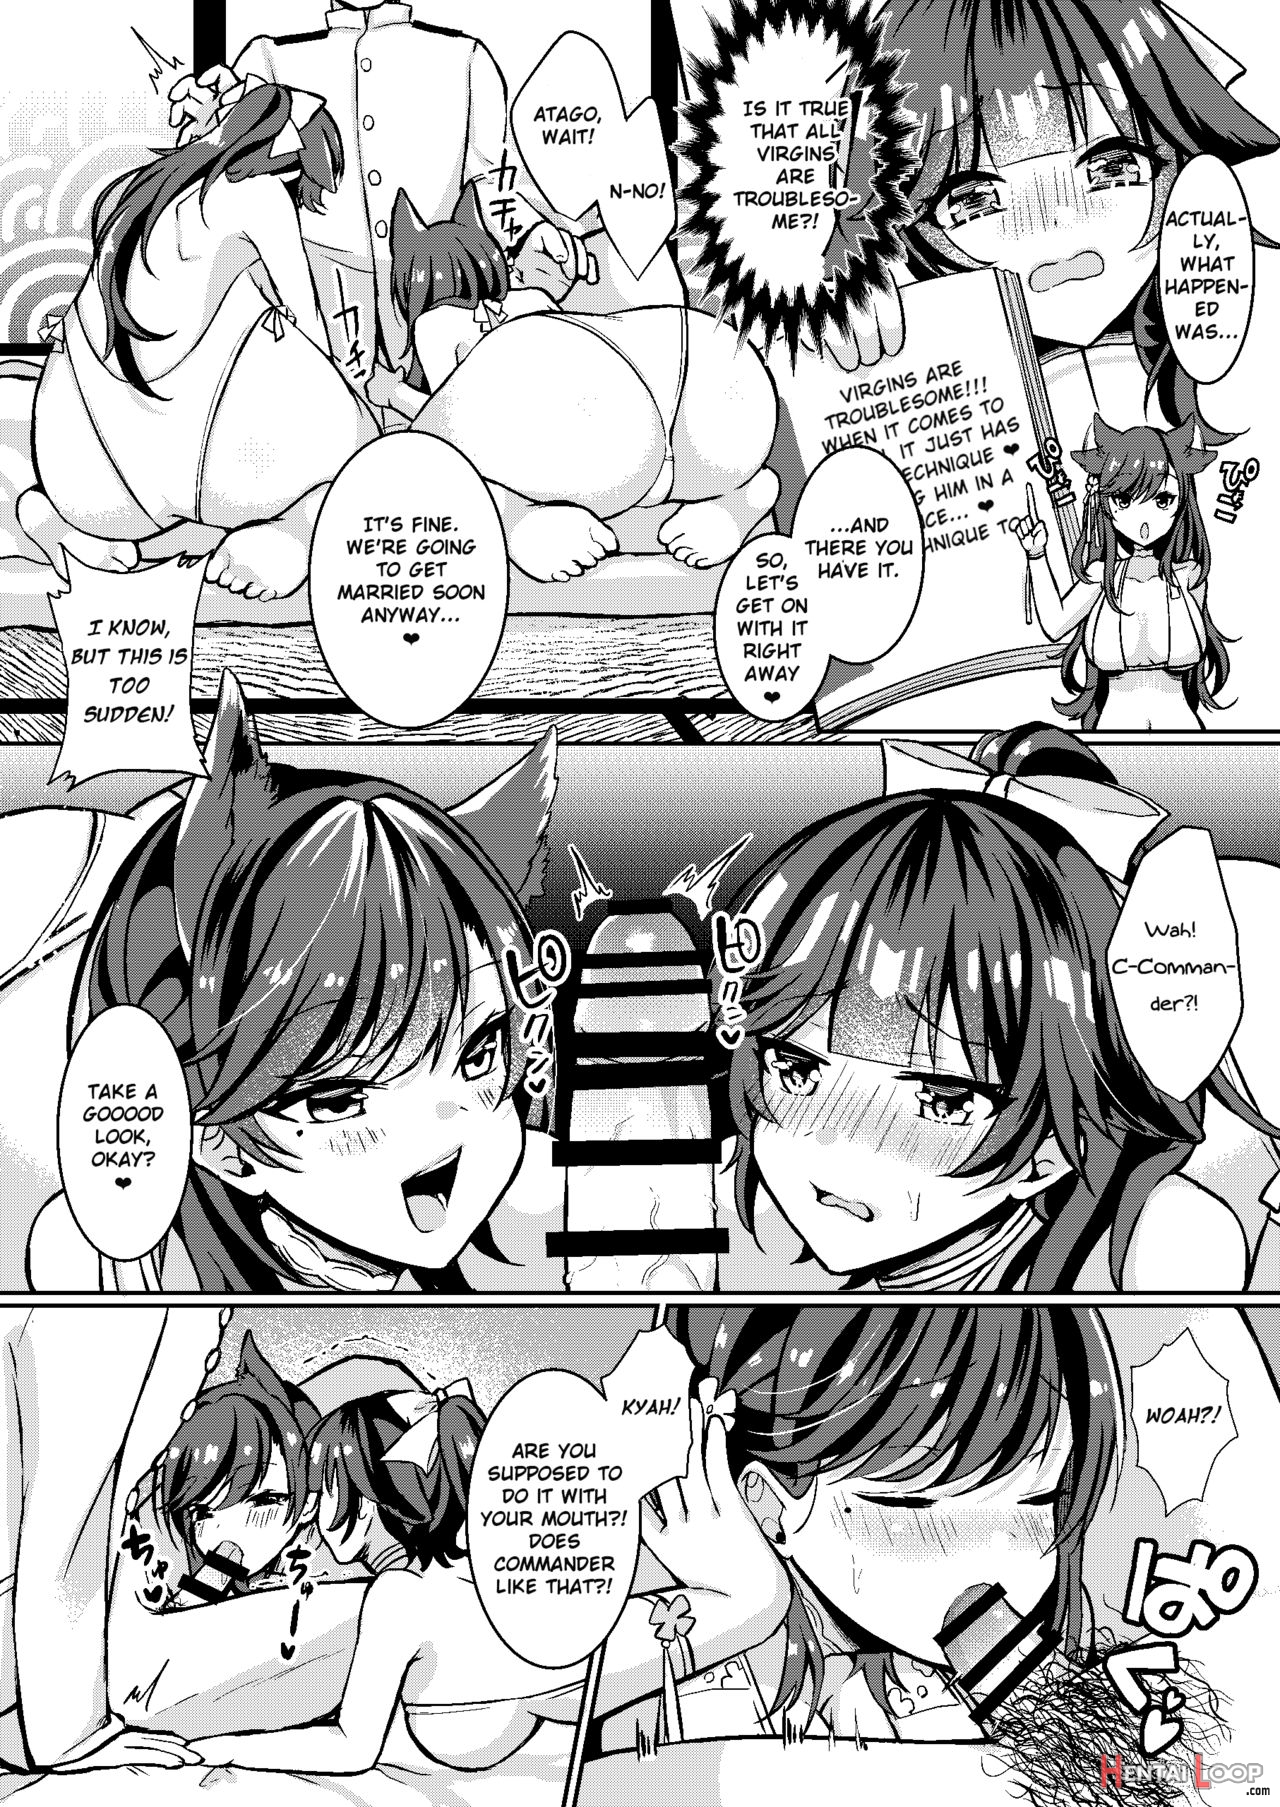 How Two Cute Sisters Love page 3